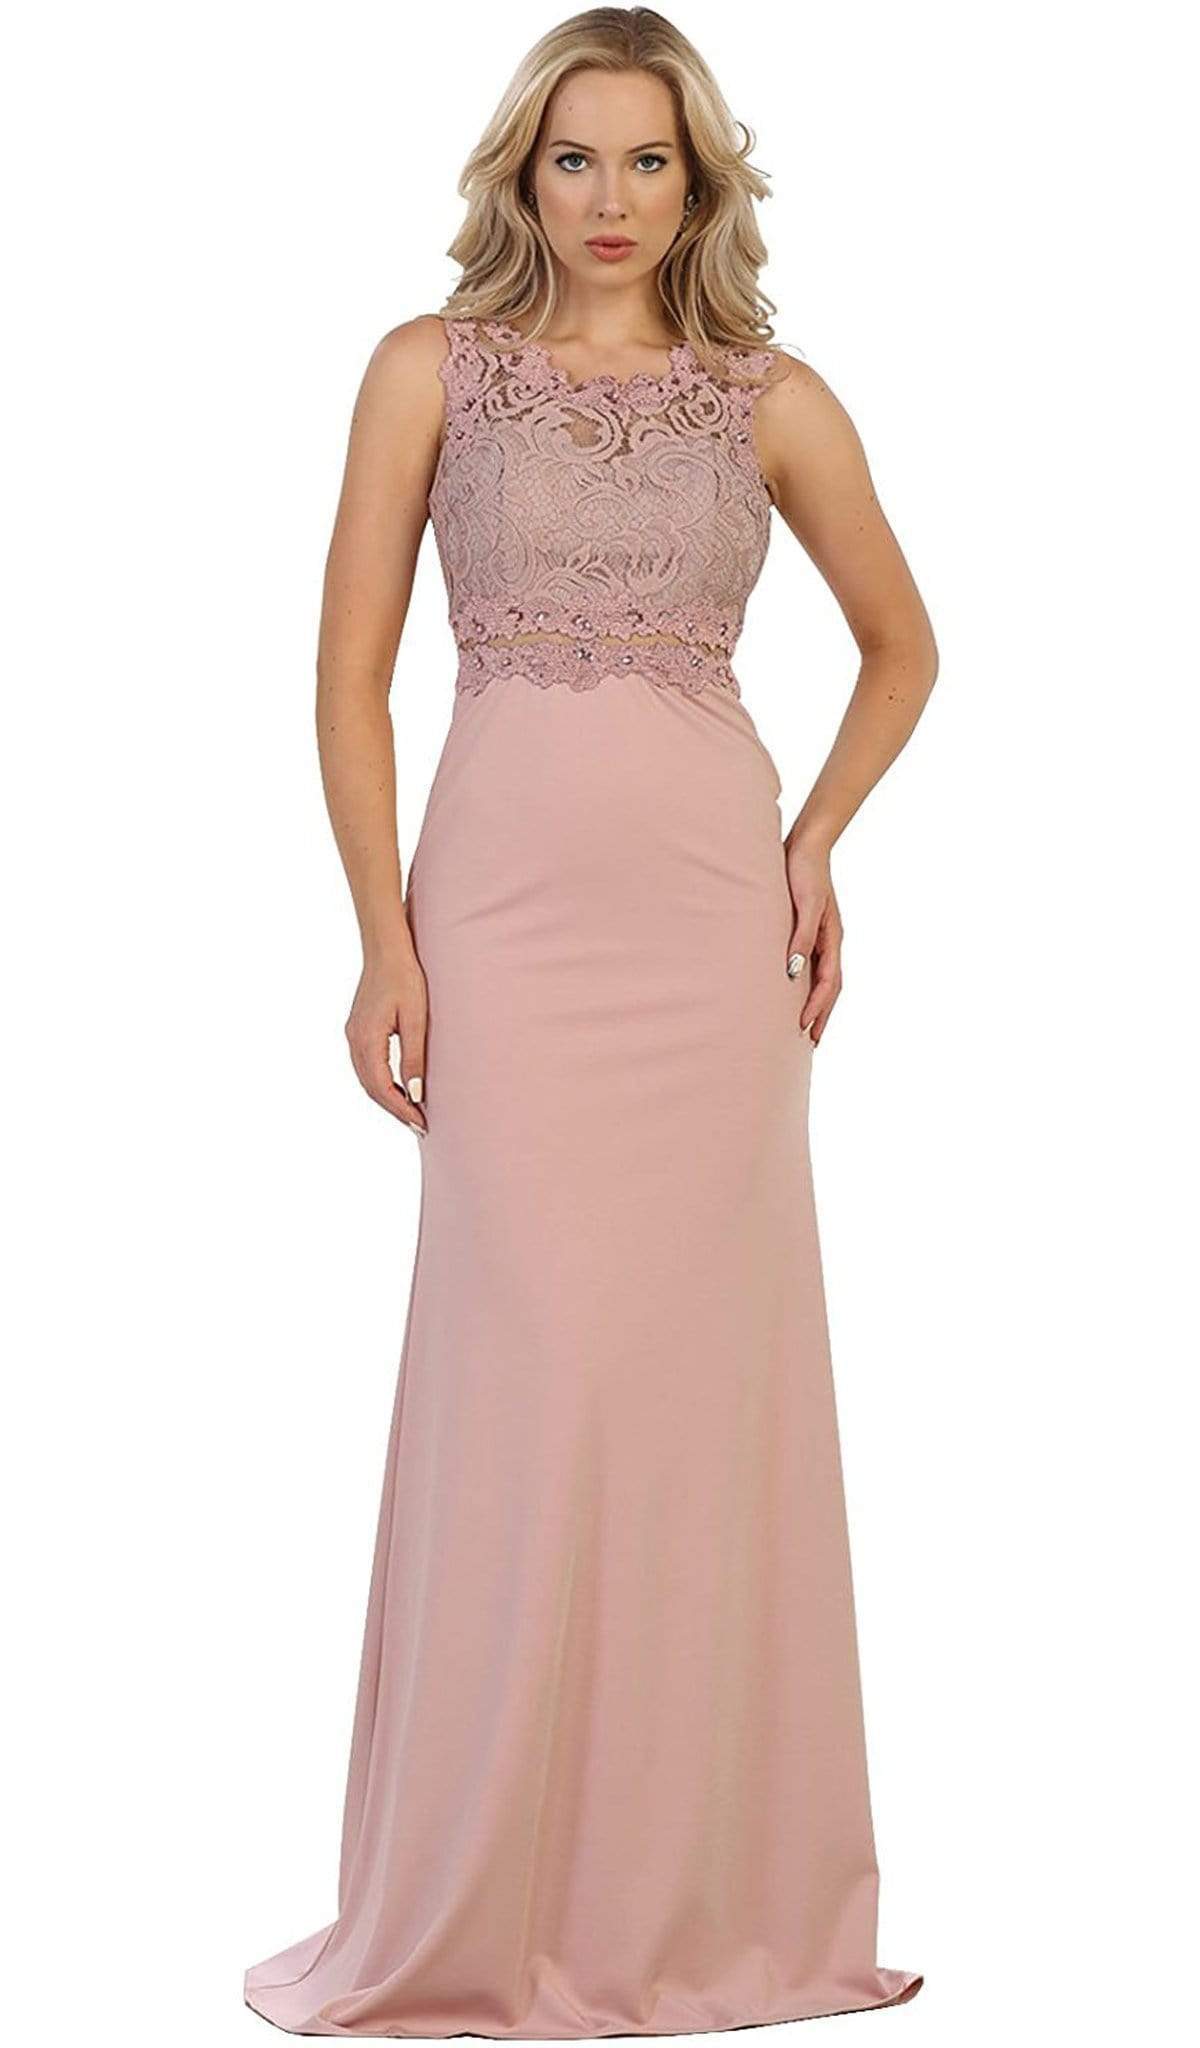 May Queen - Lace Bodice Illusion Paneled Sheath Evening Gown Special Occasion Dress 4 / Dusty-Rose